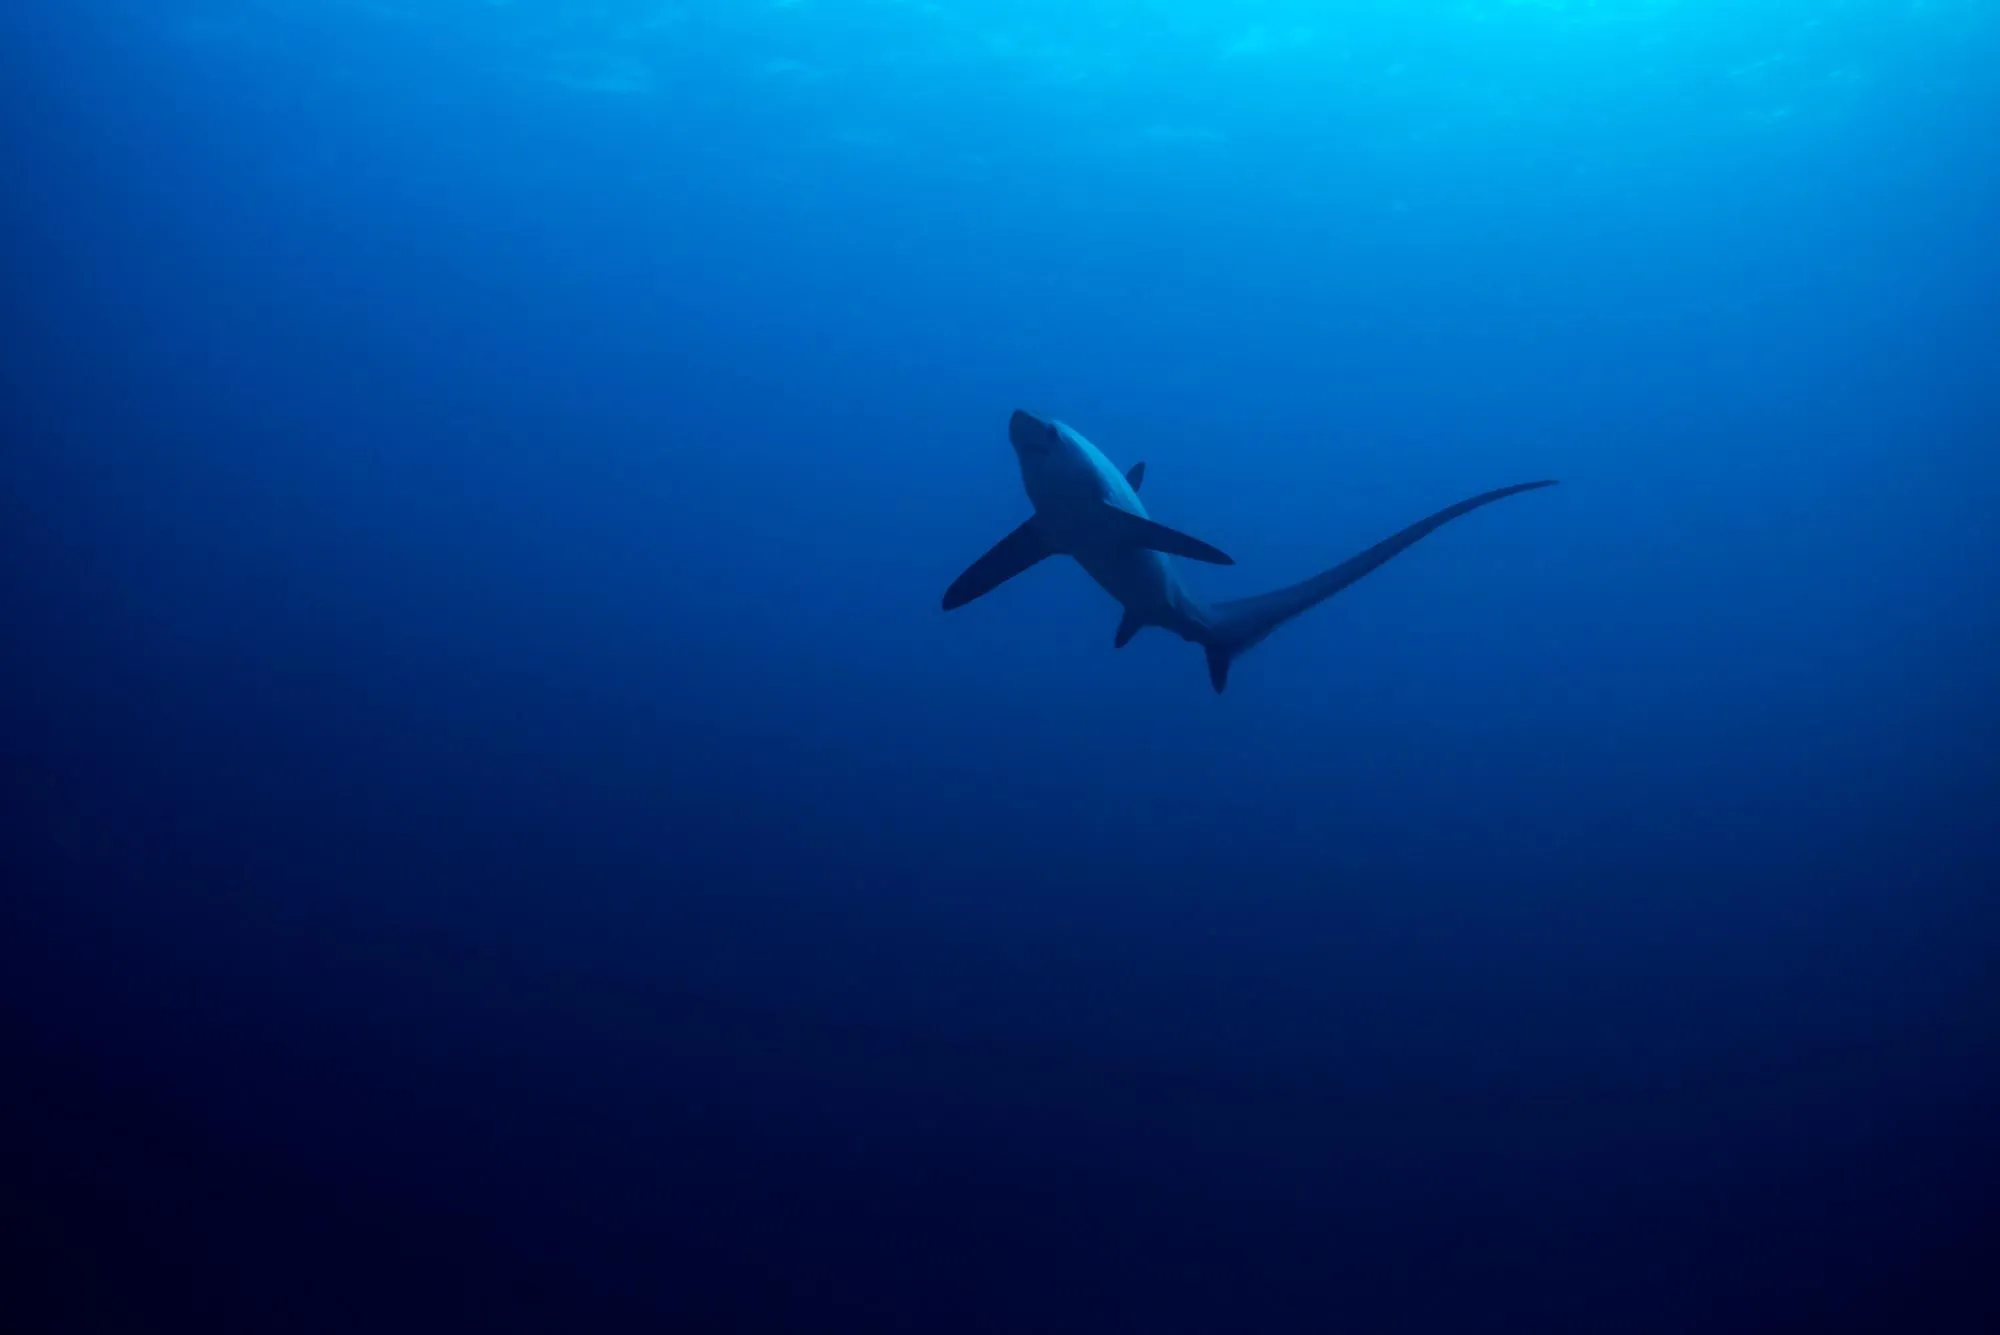 Thresher shark facts are fun to read.